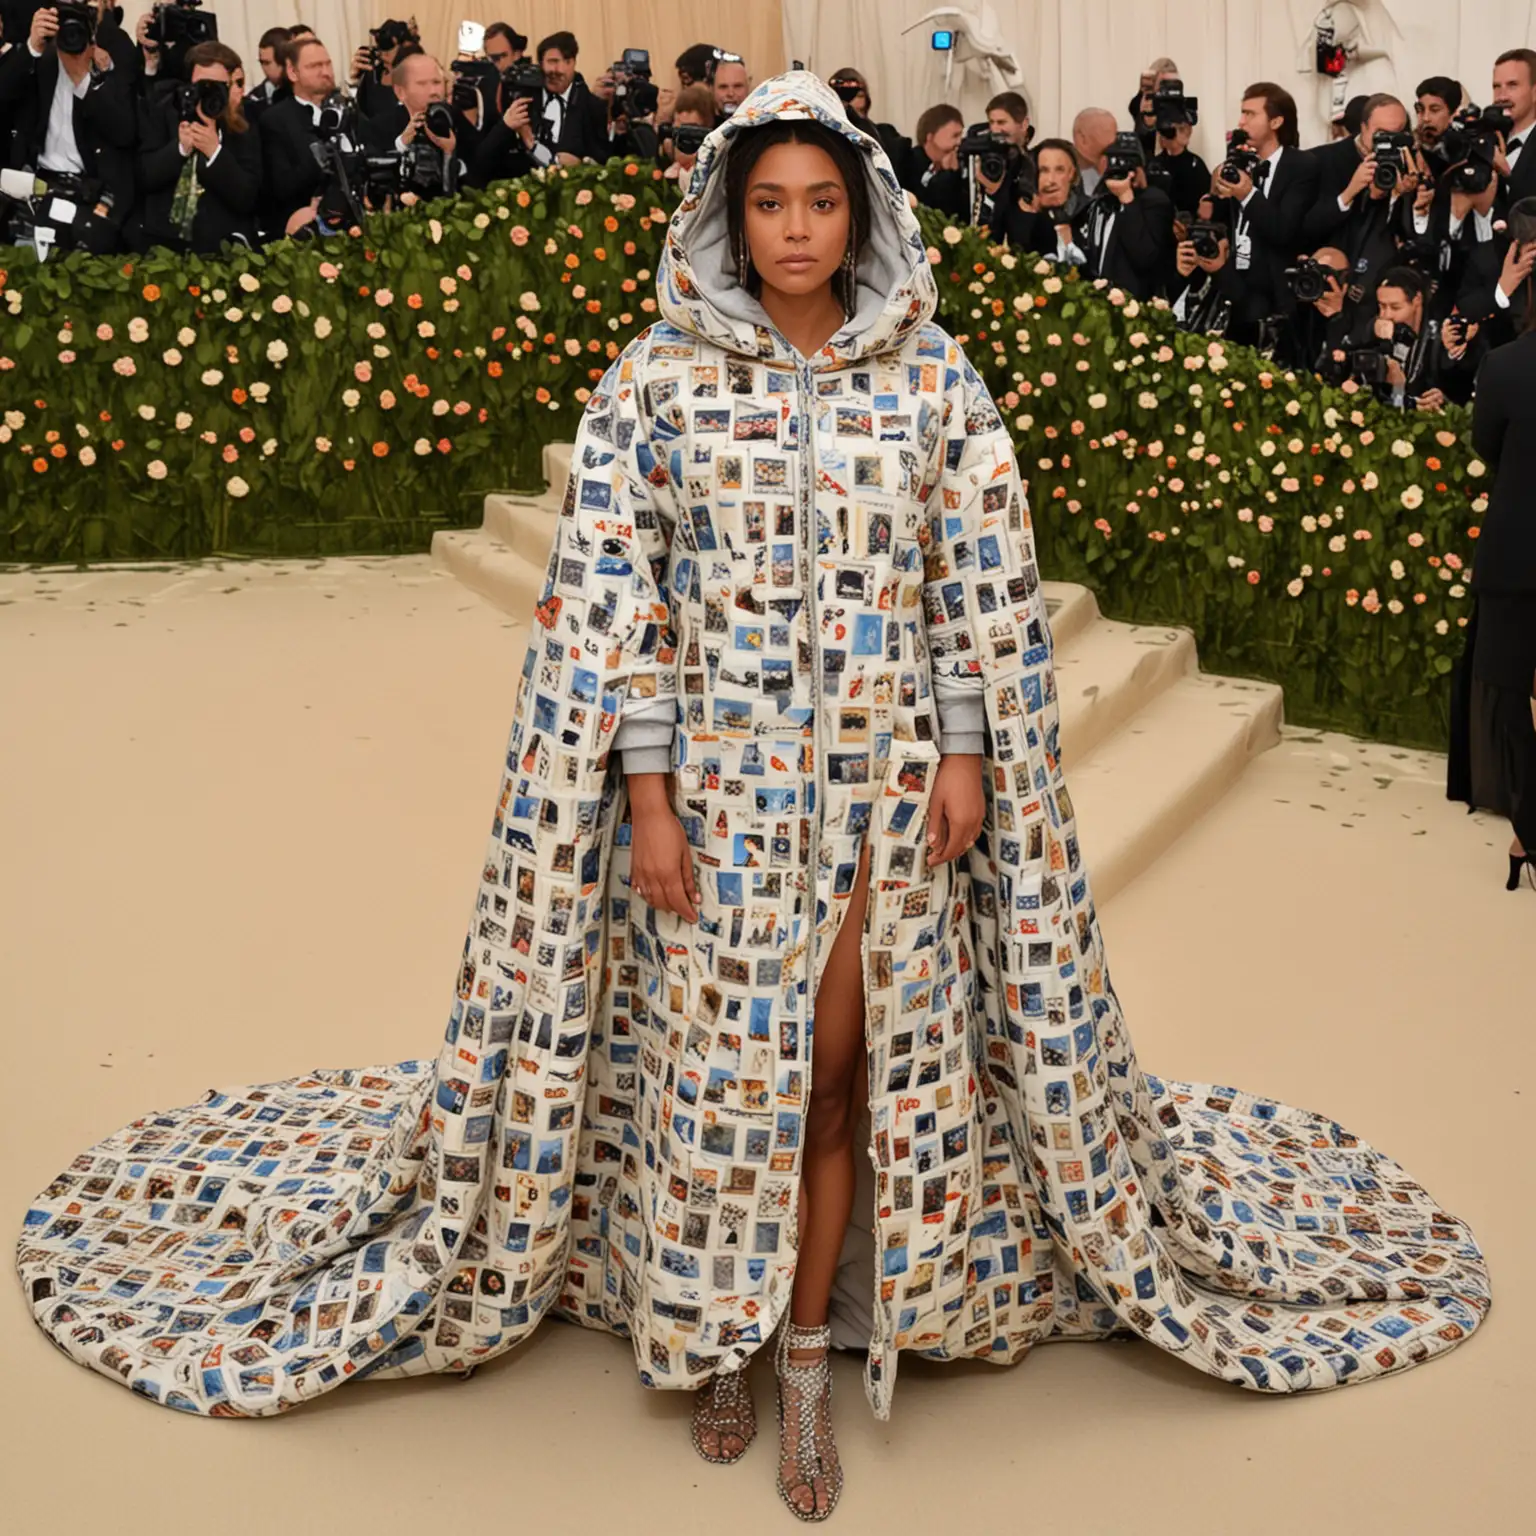 A celebrity wearing a duvet themed dress with a hoodie at the Met Gala